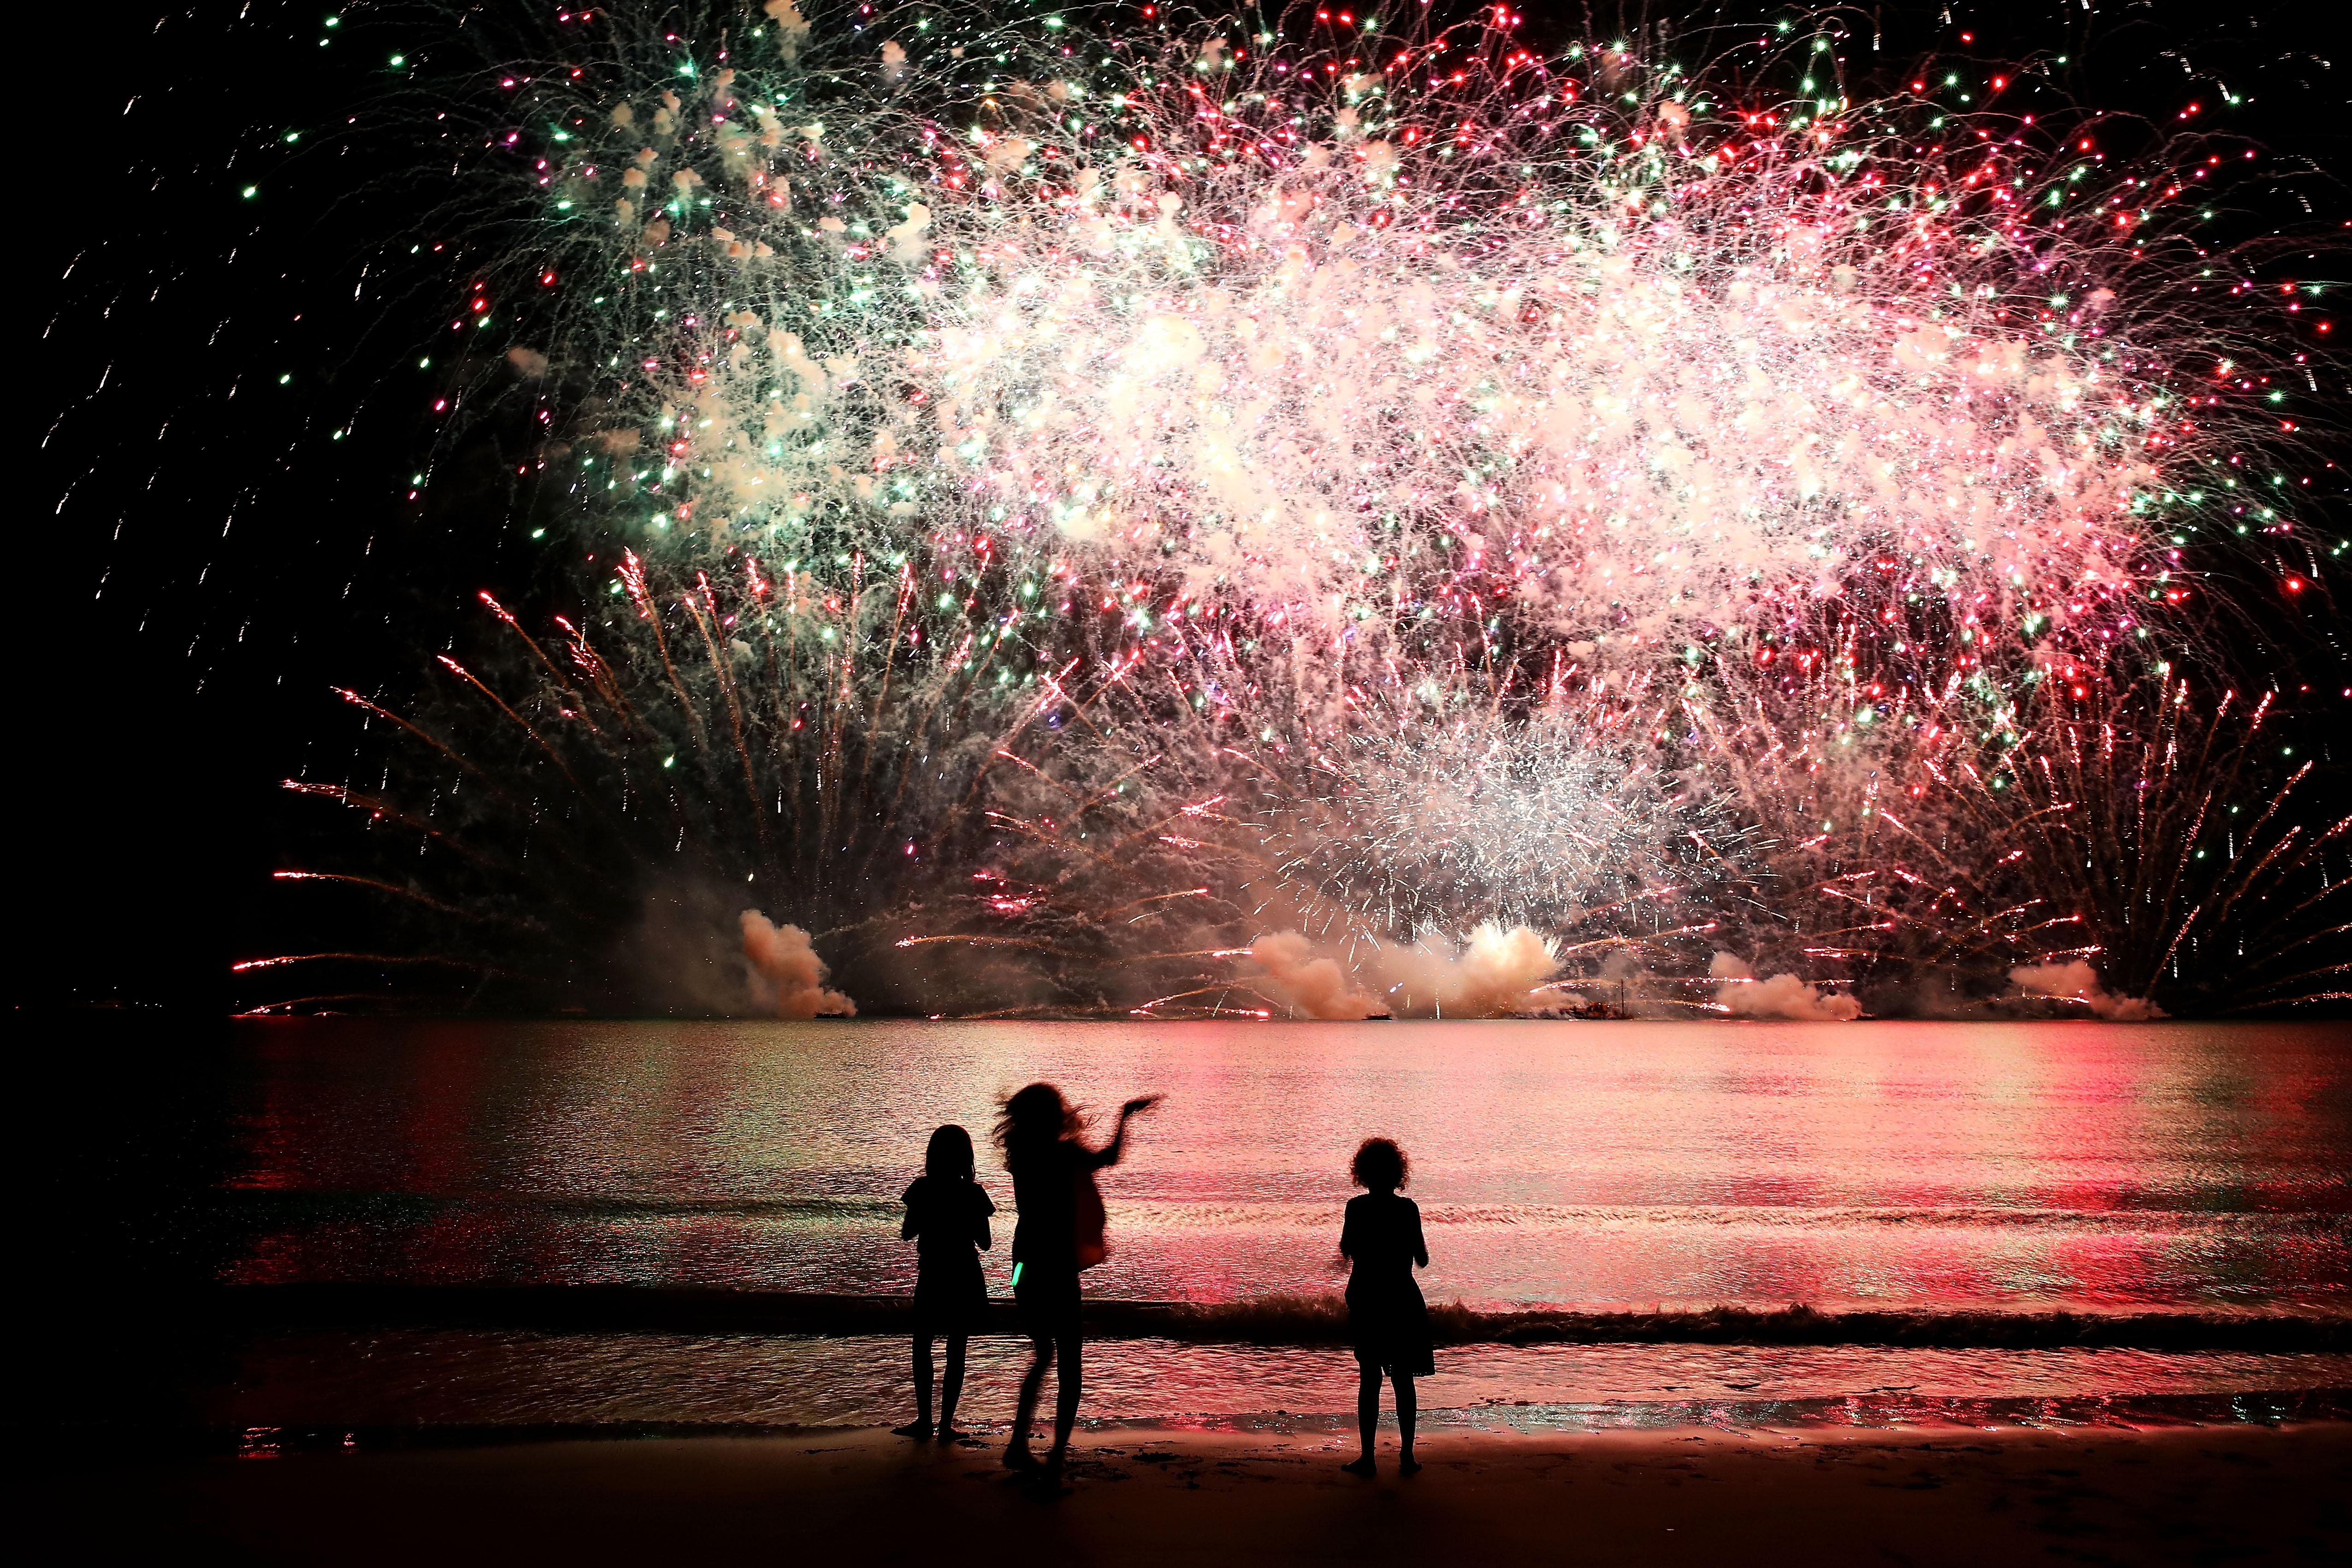 Young girls watch a fireworks display on a beach.